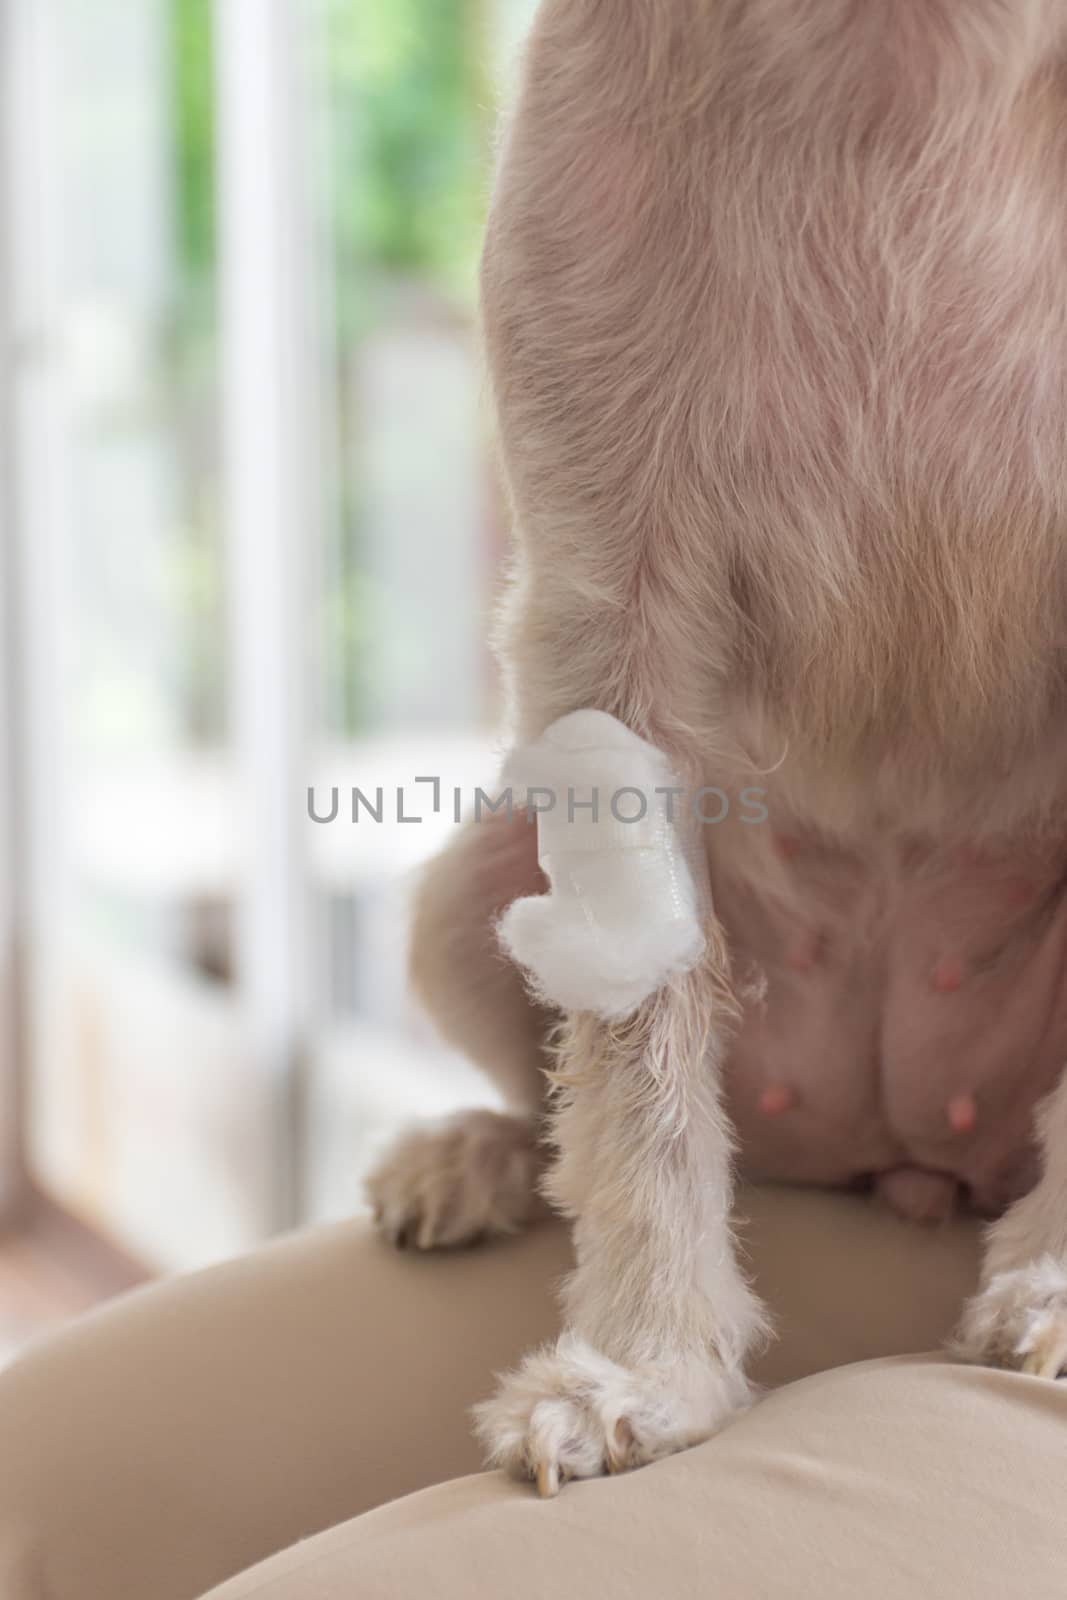 Dog broken leg sore with a bandage making by veterinarian doctor during the examination in veterinary clinic